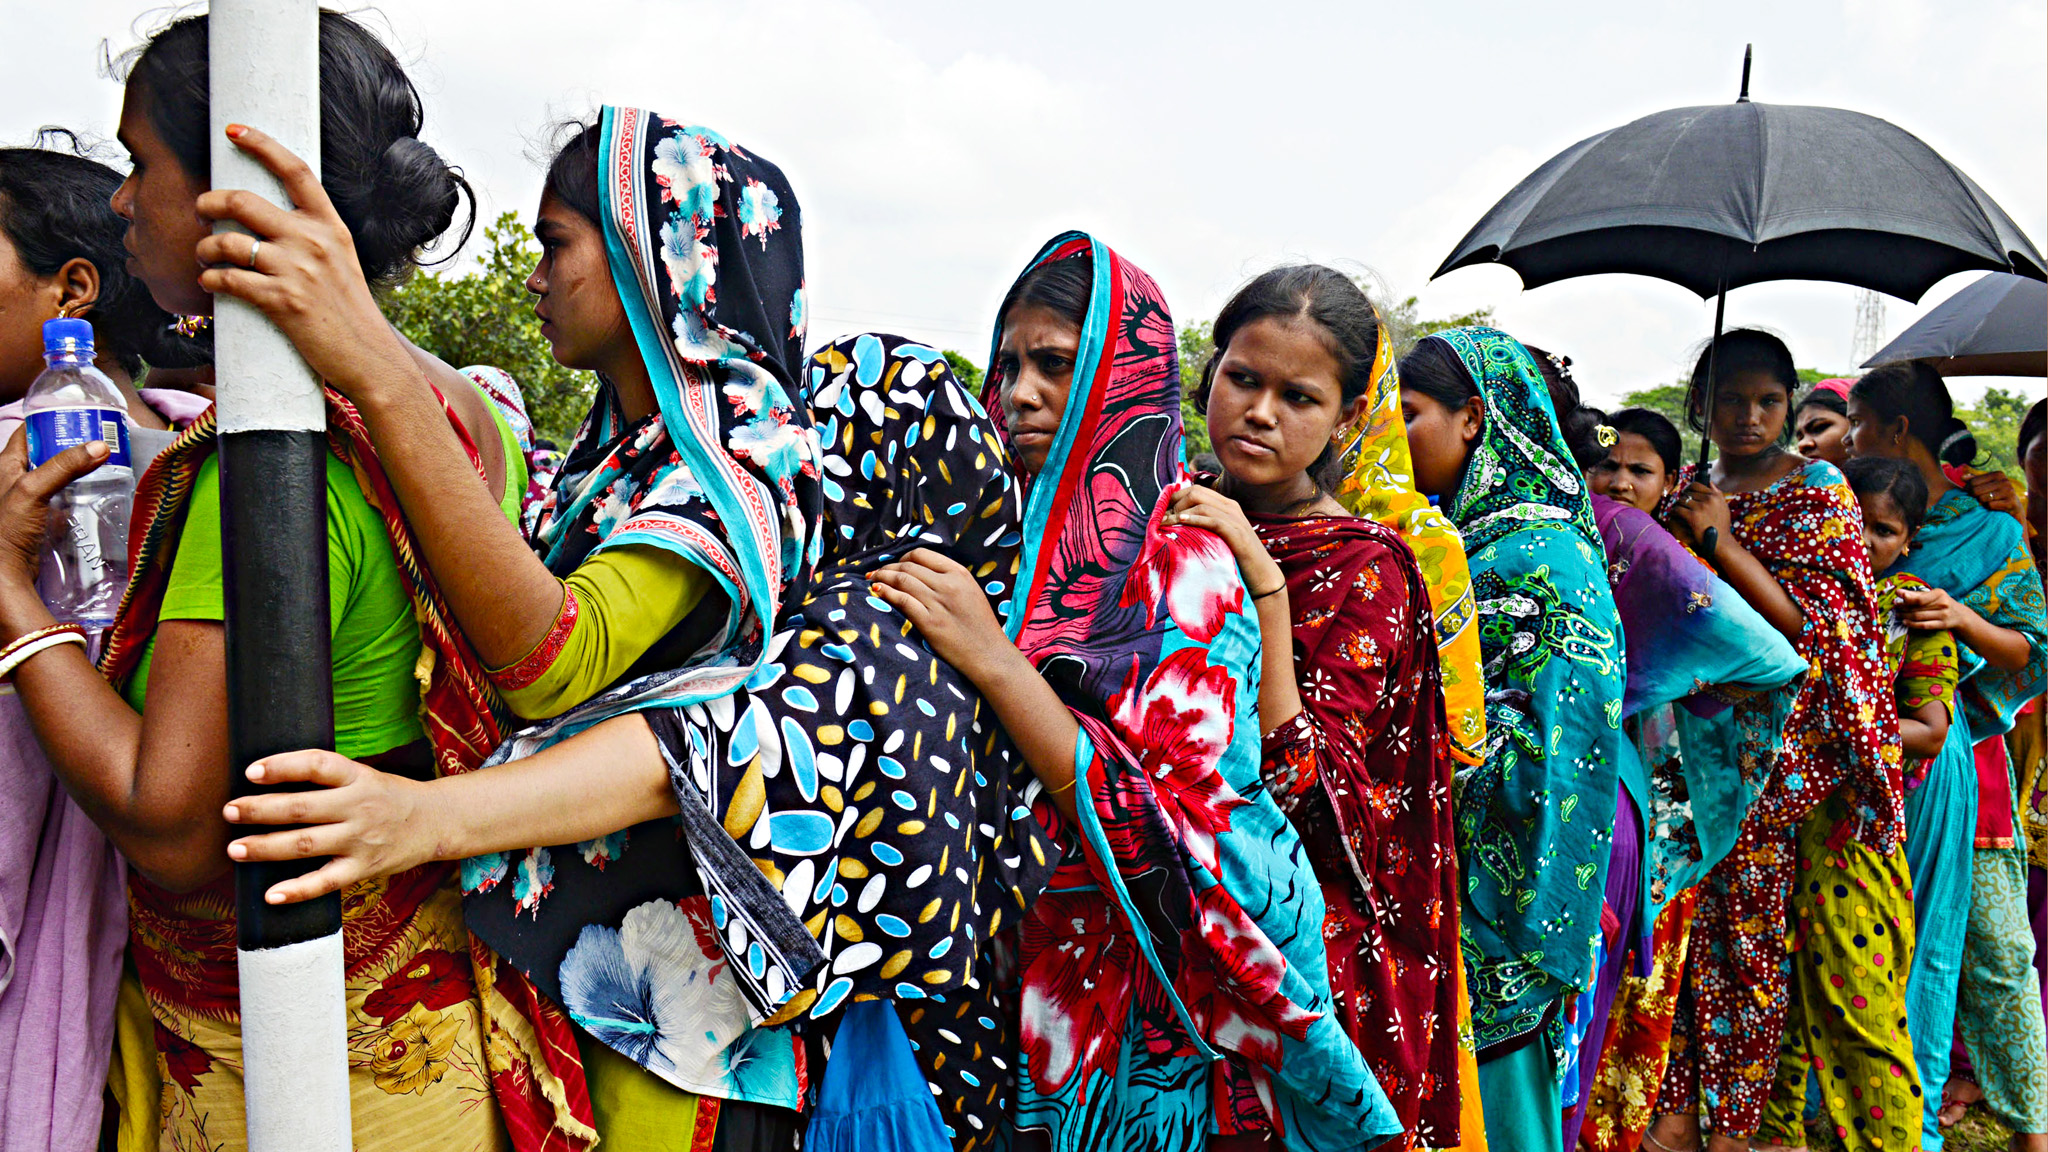 Garment workers employed at Rana Plaza stand in a queue to receive wages in Dhaka